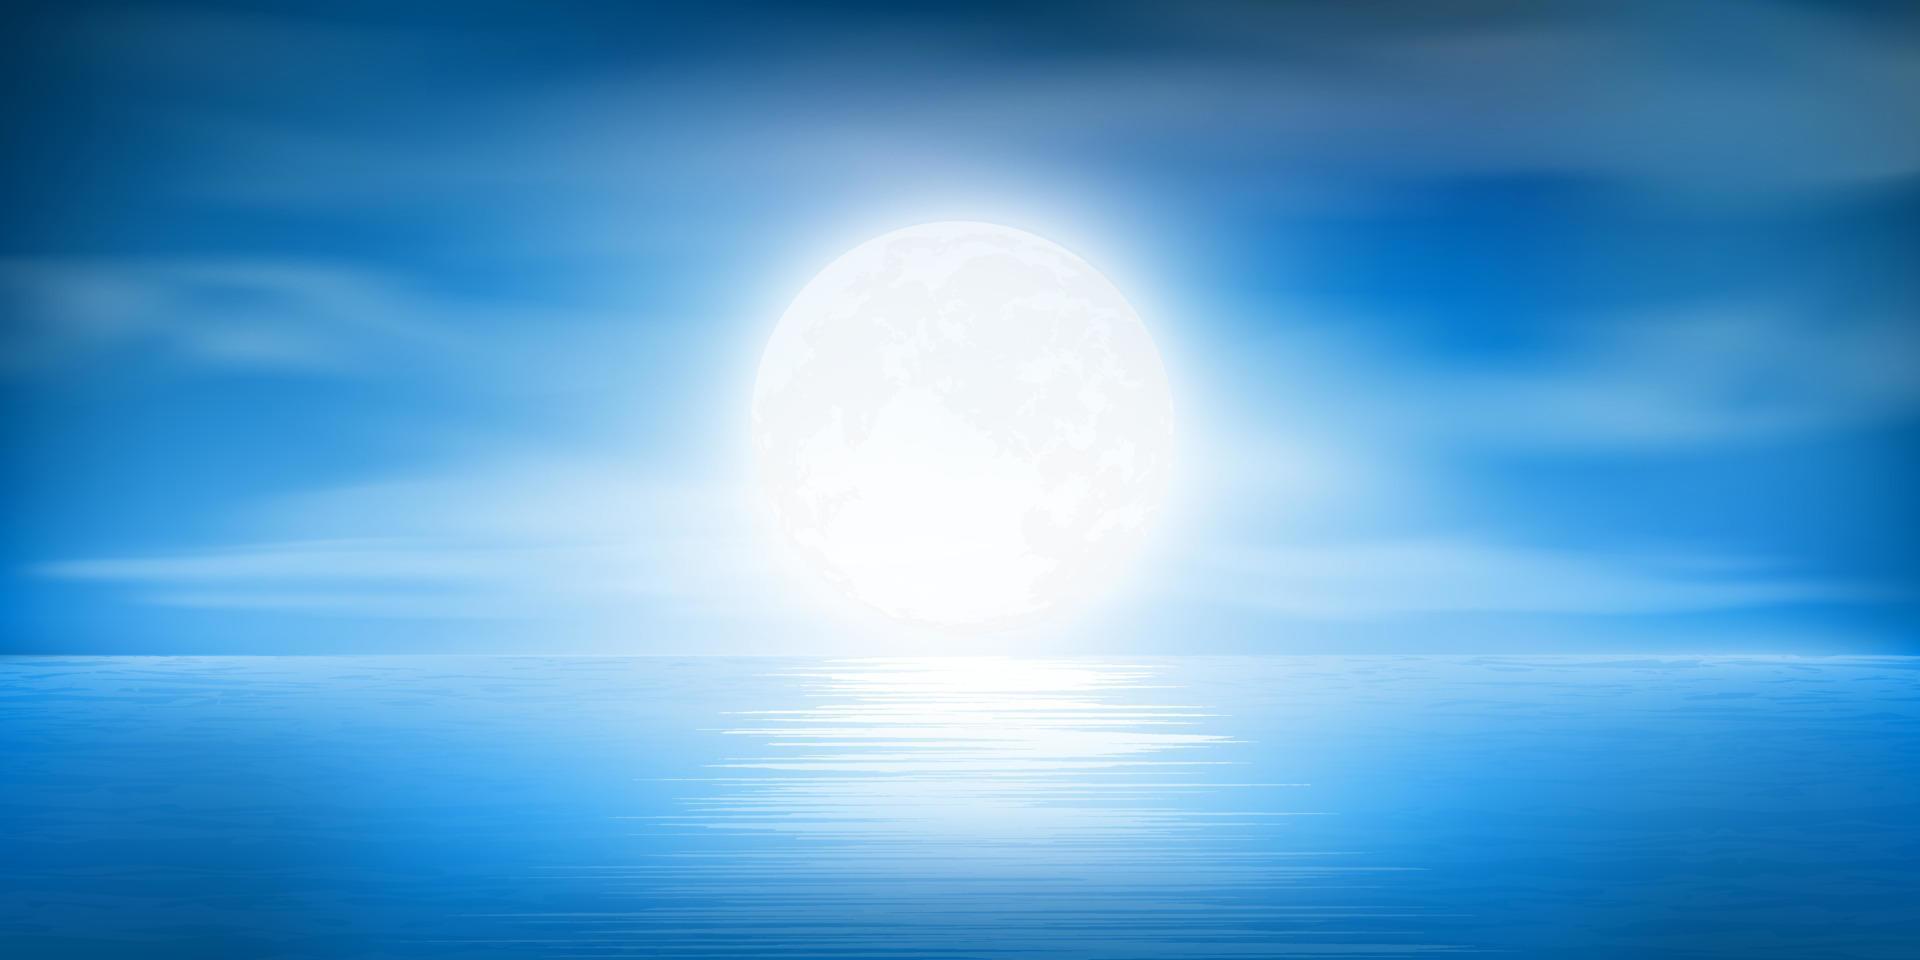 full moon night with clouds vector